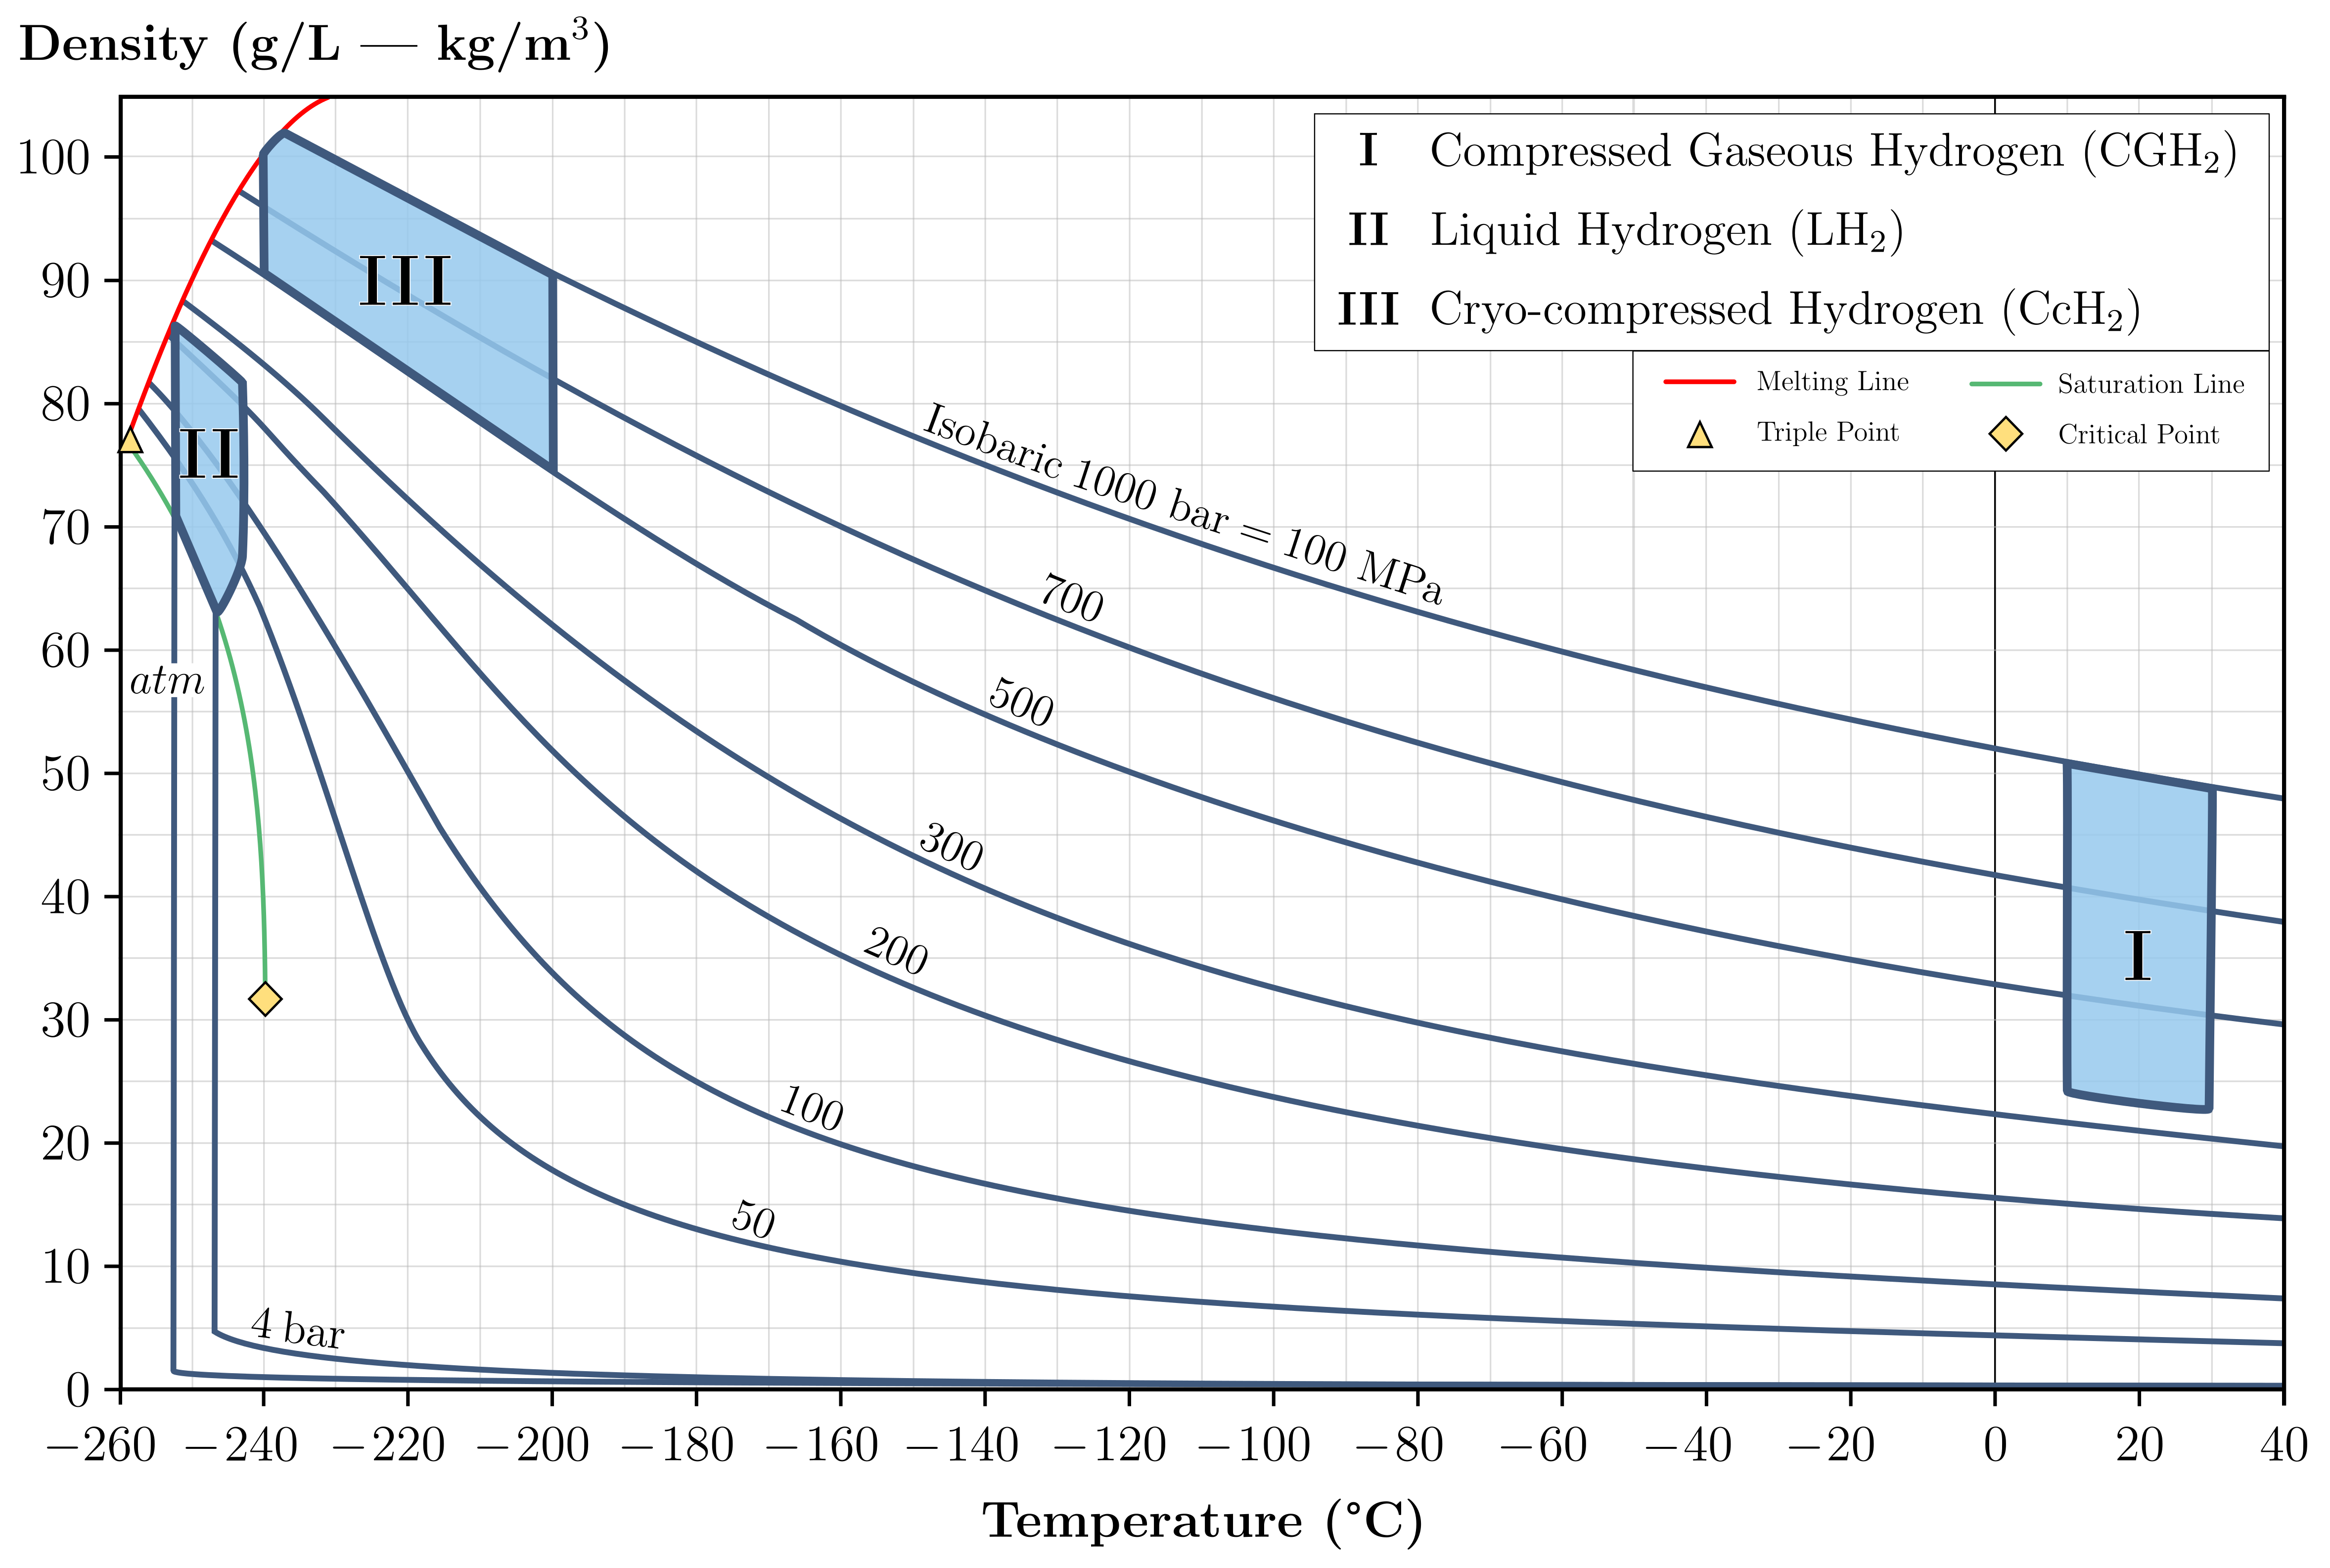 Correlation of hydrogen density and temperature for different conditions